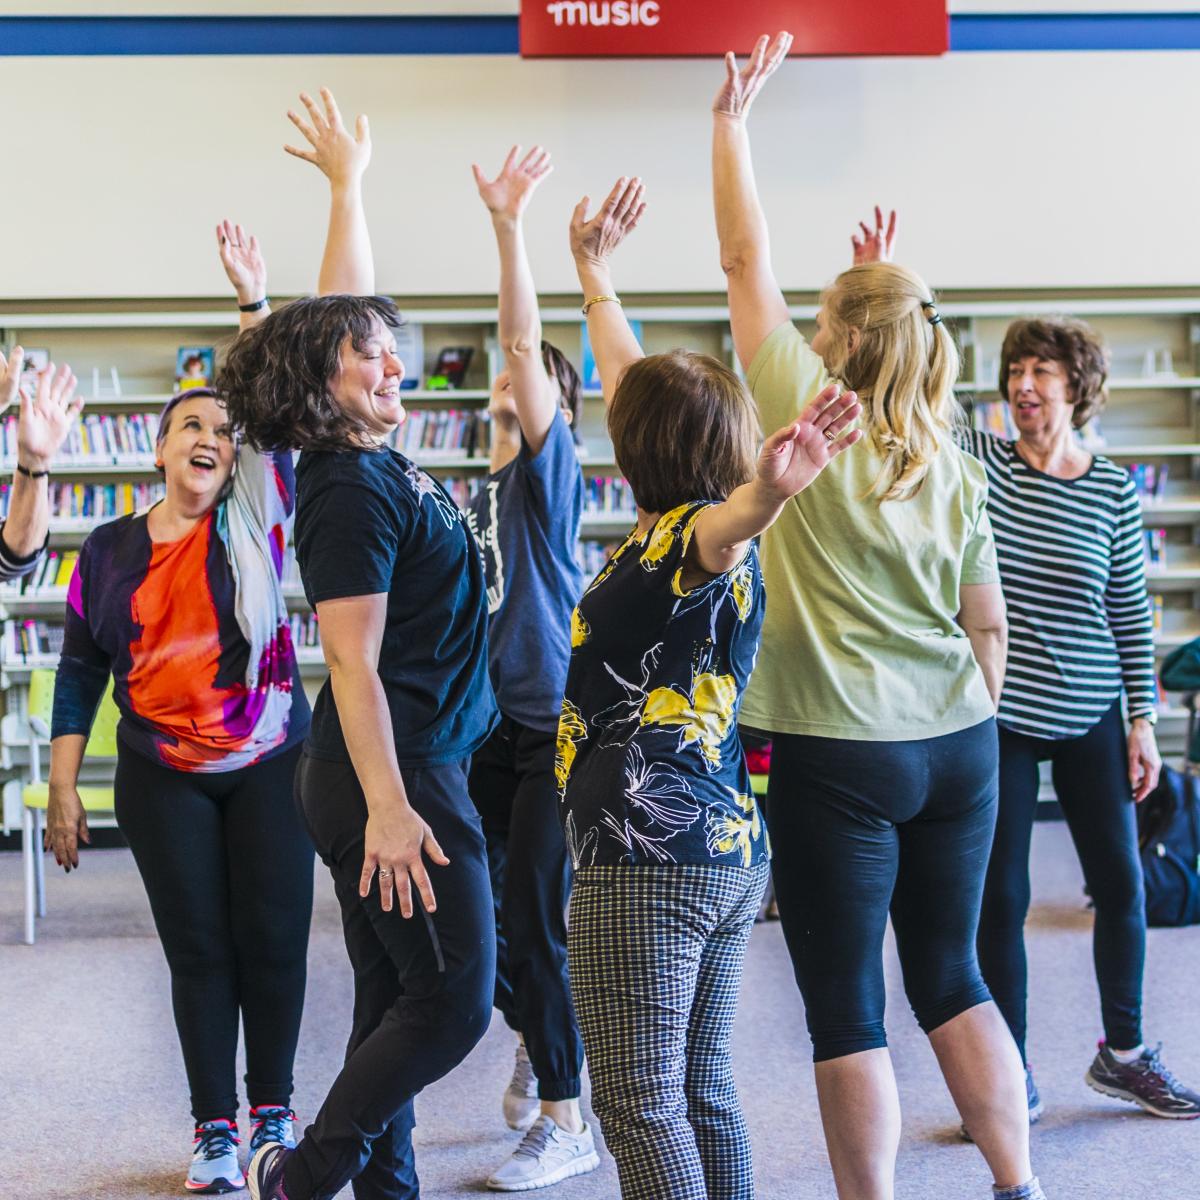 A group of smiling people dance in a library.